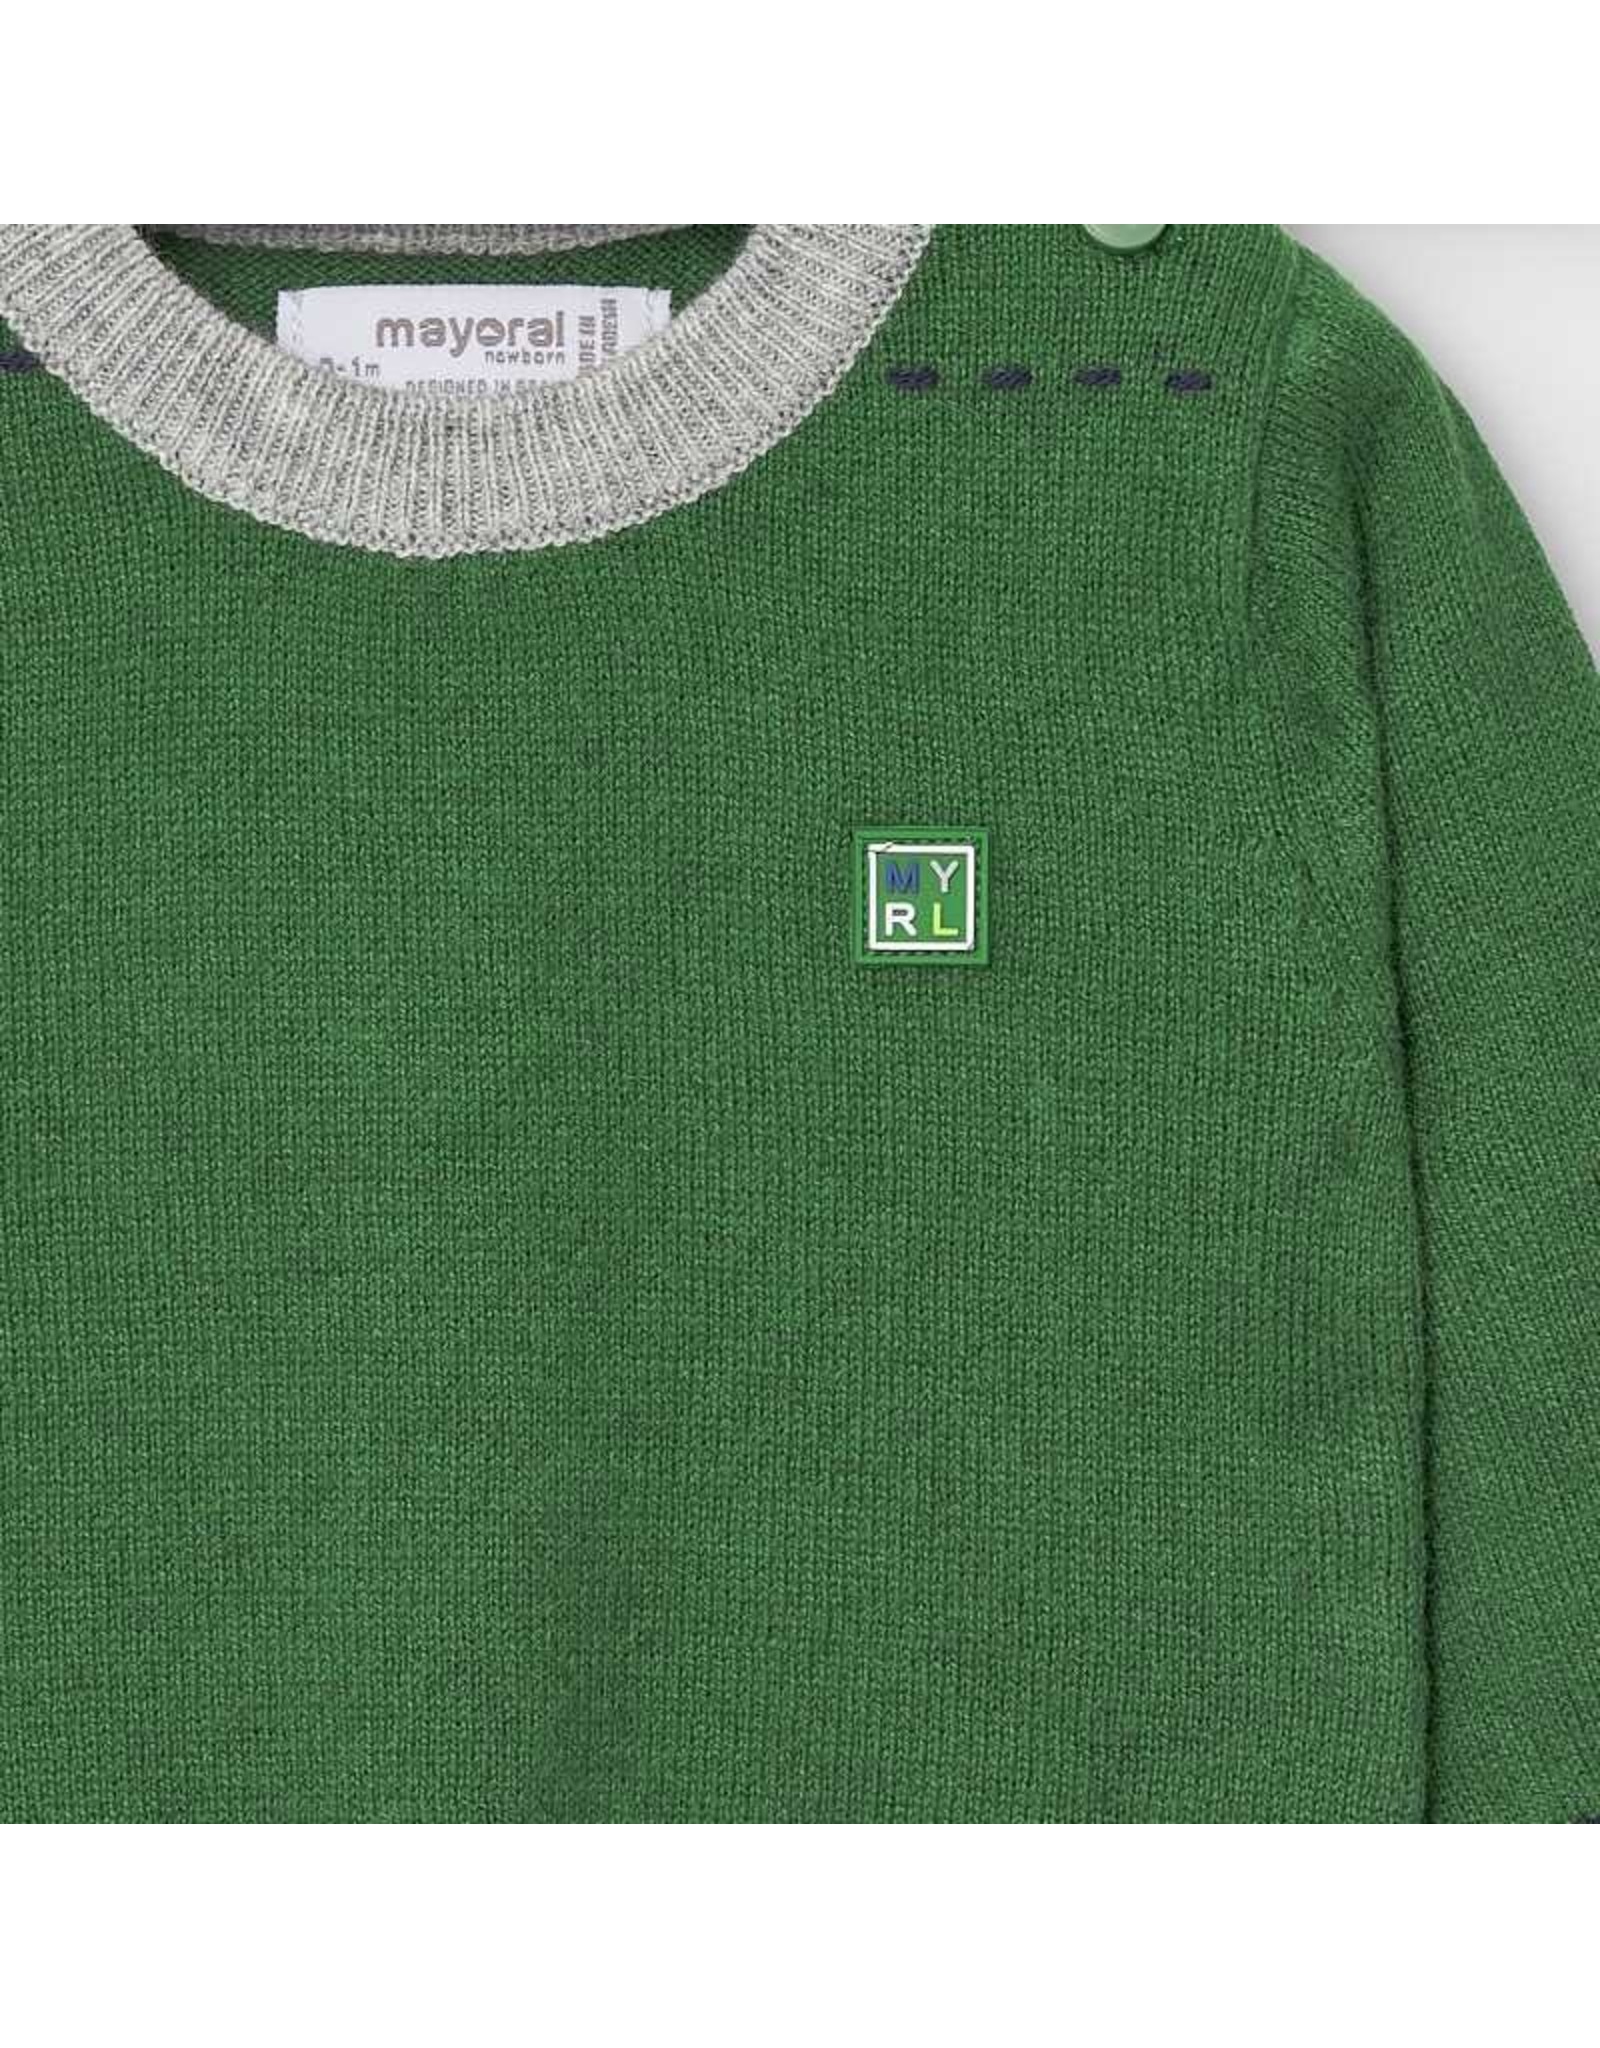 Mayoral Moss Green Sweater